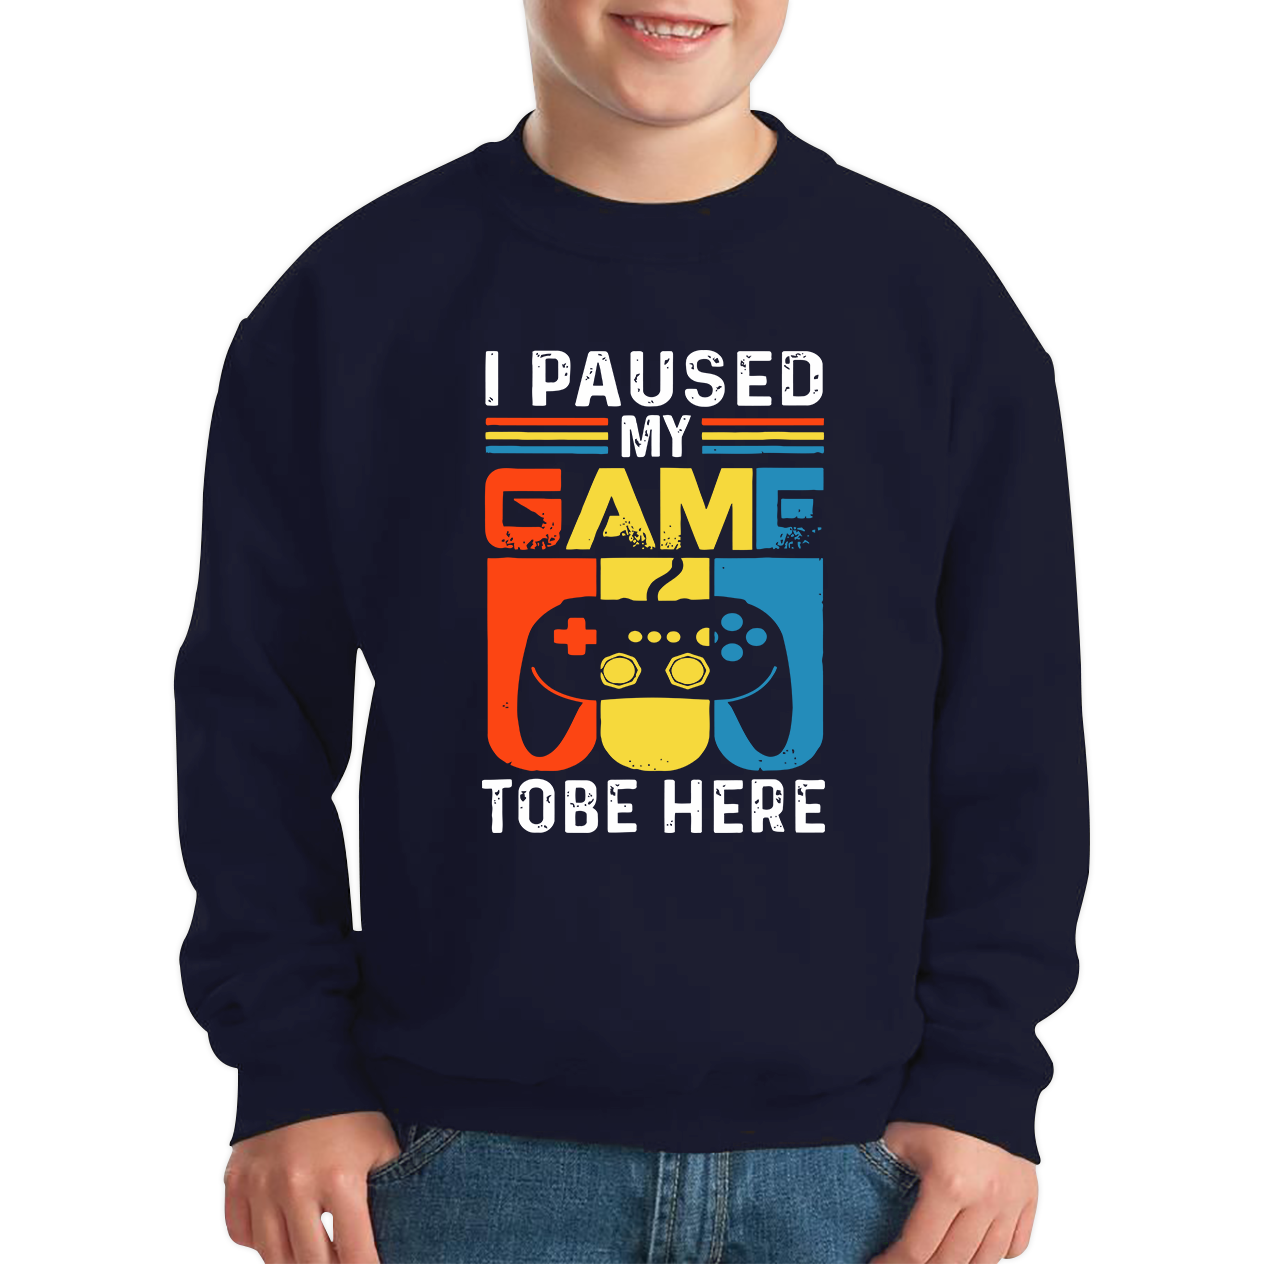 I Paused My Game To Be Here Funny Novelty Sarcastic Video Game Kids Sweatshirt